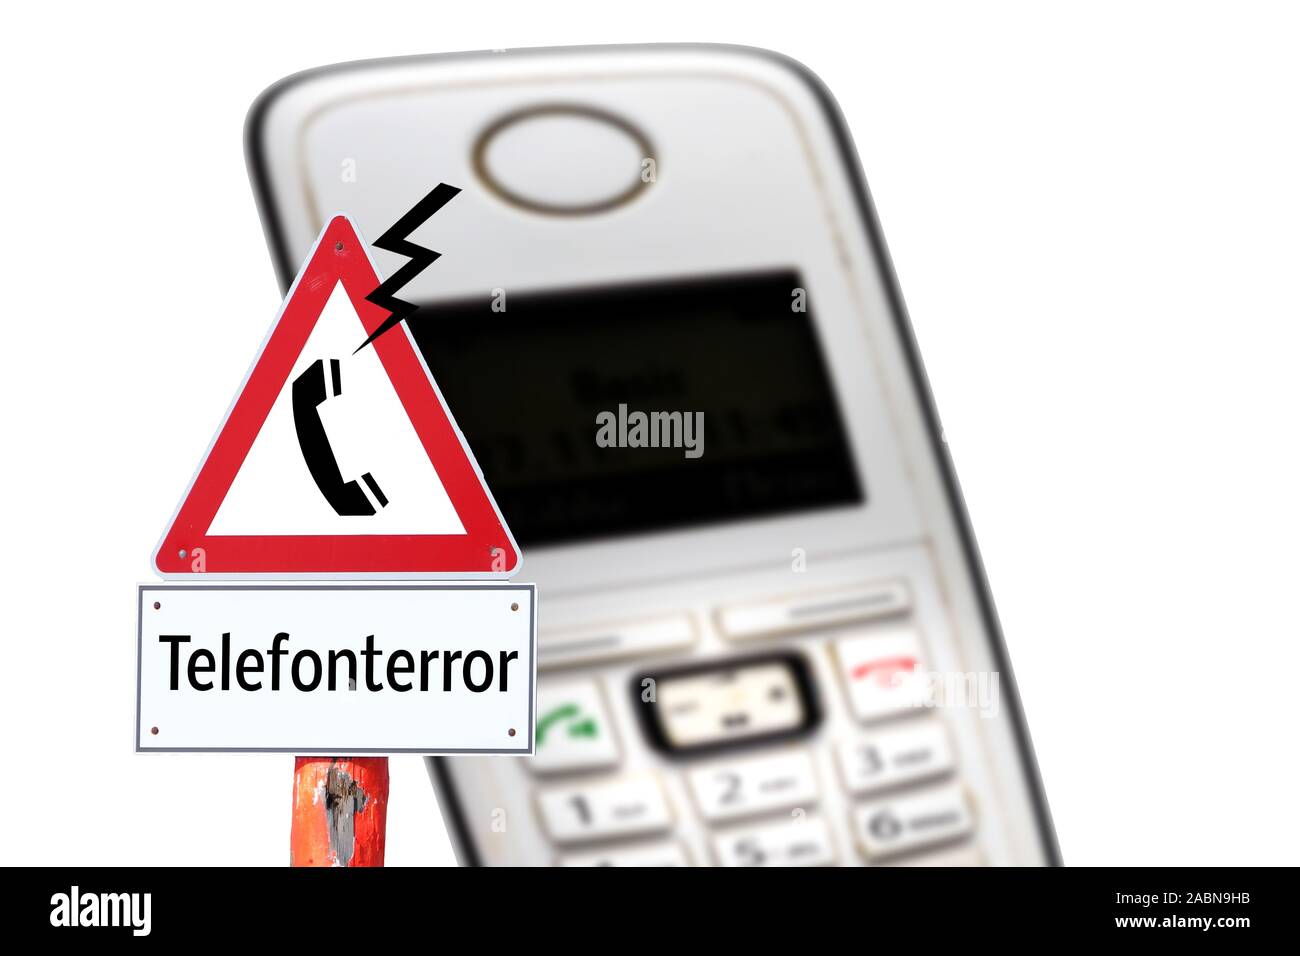 Warning sign phone terror stalking on the phone in german Stock Photo